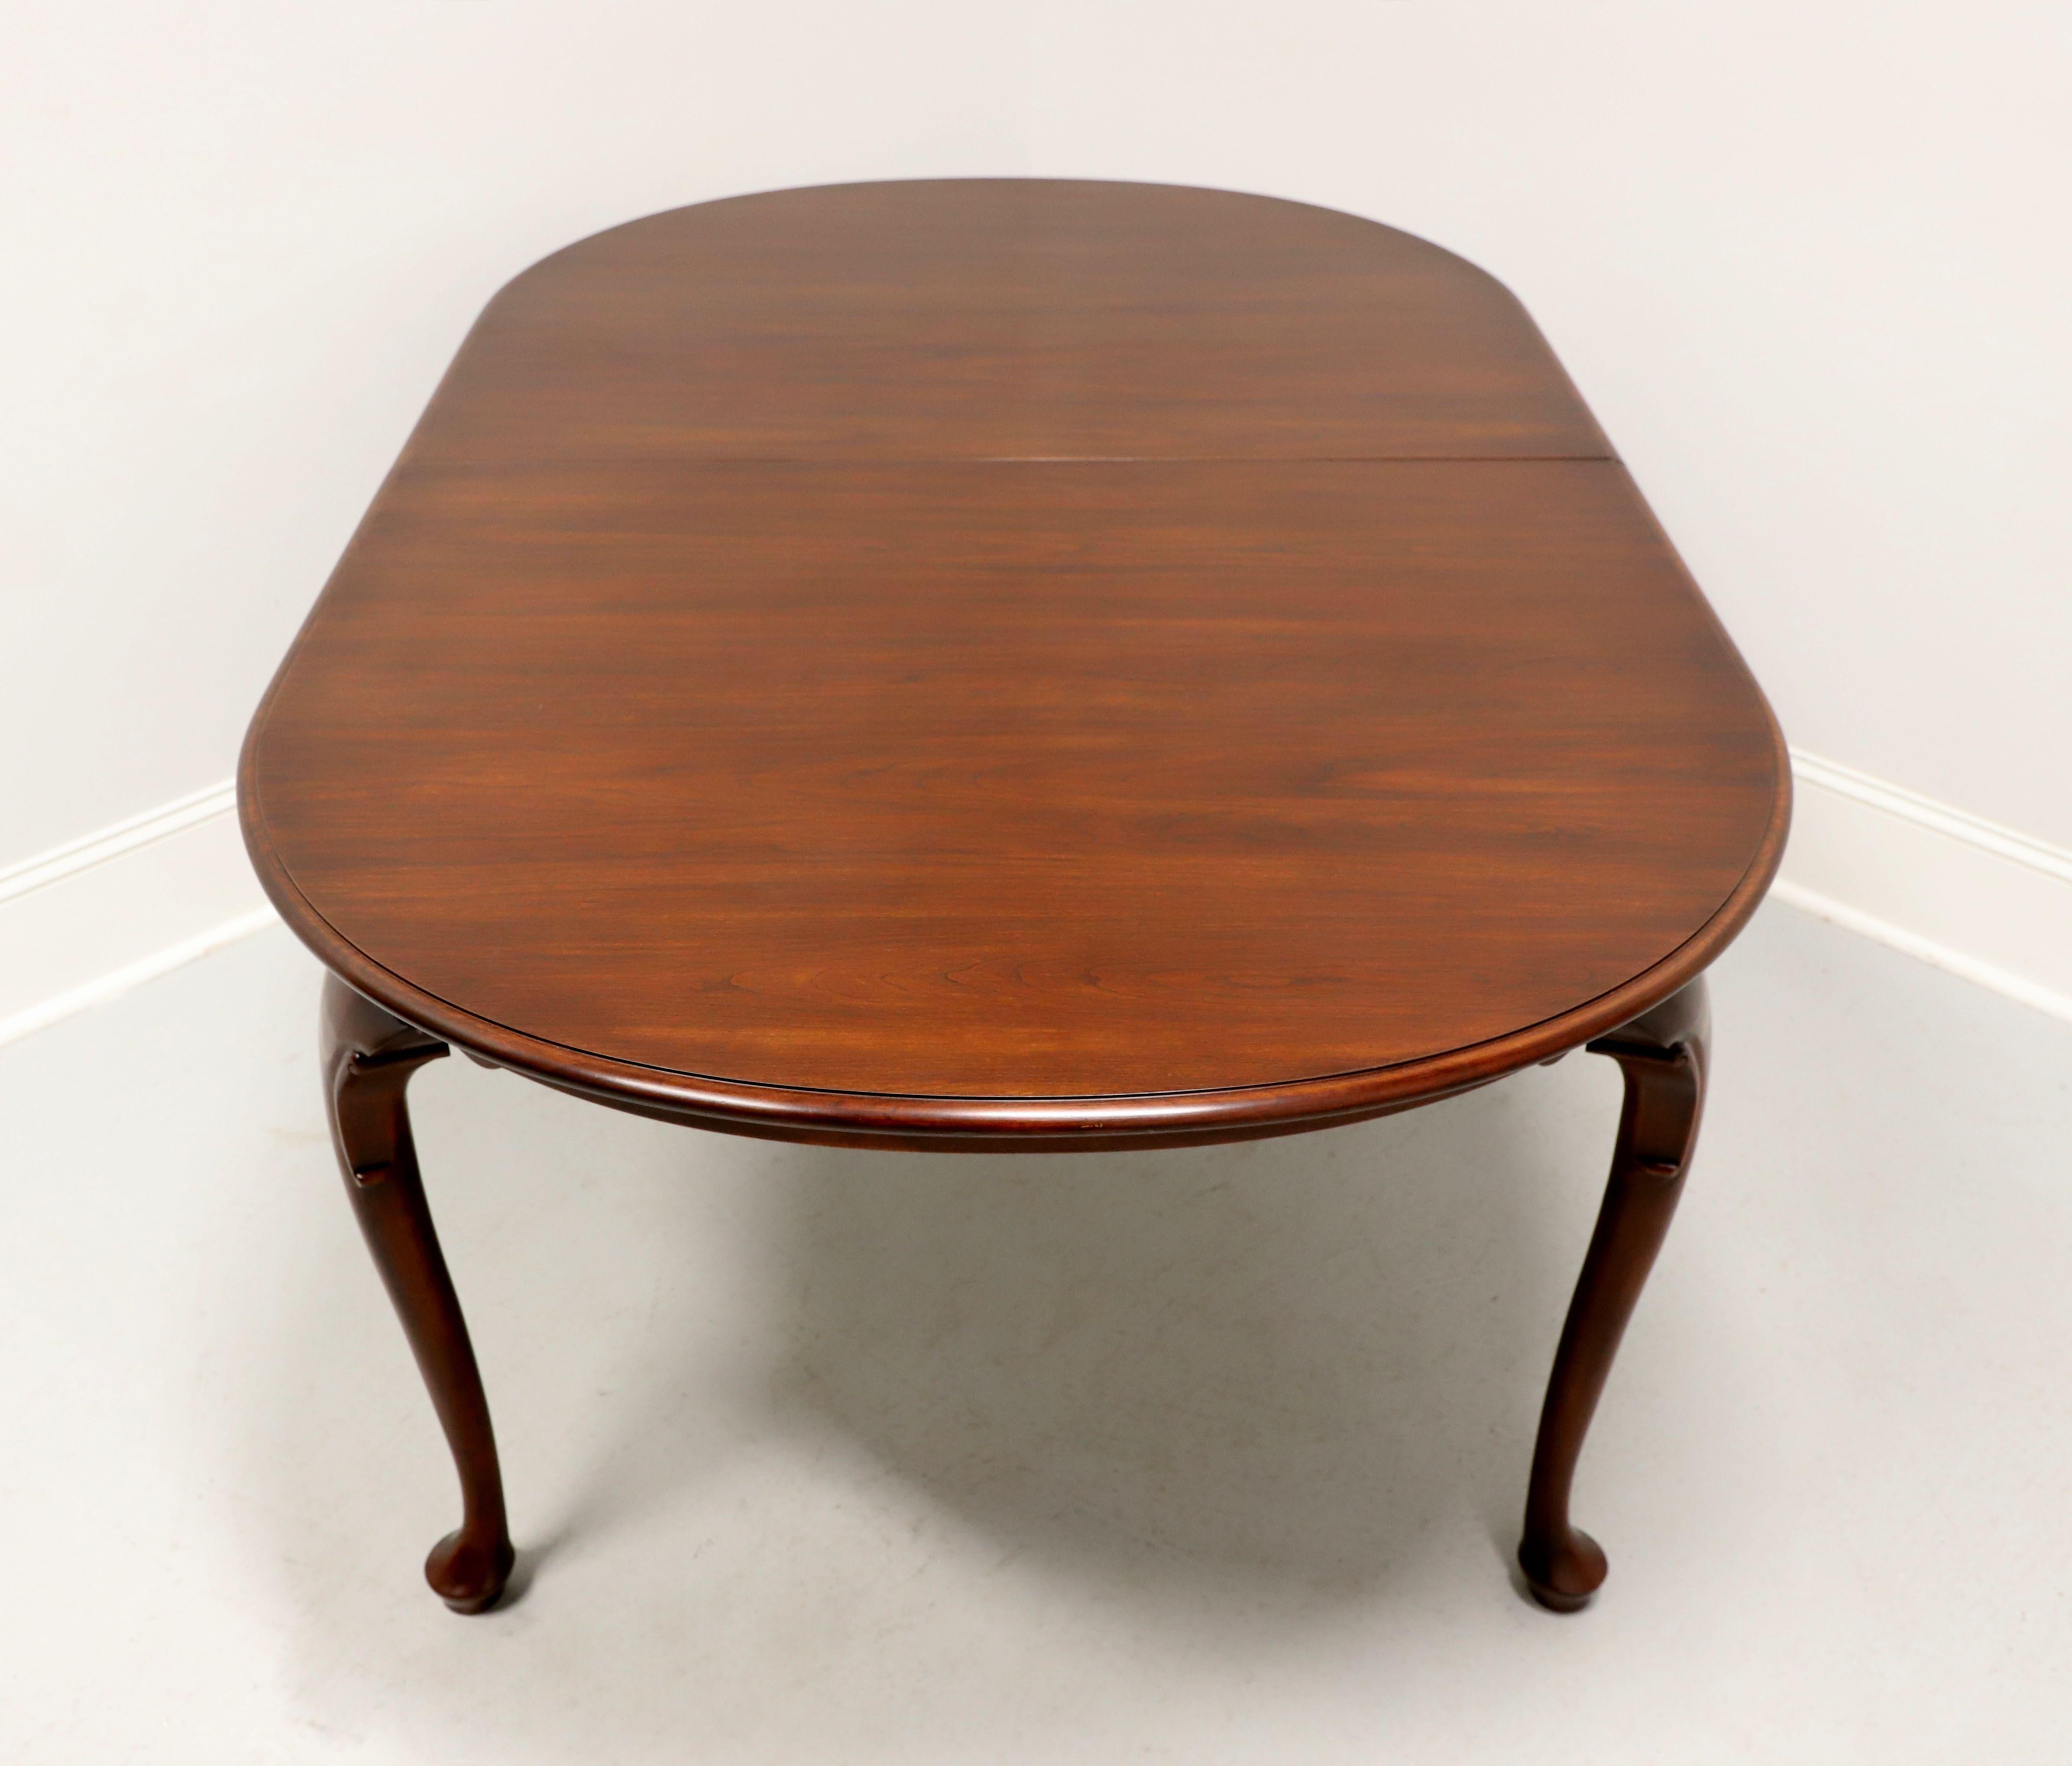 A Queen Anne style oval dining table by Henkel Harris of Winchester, Virginia, USA. Solid wild black cherry wood with bevel edge to the top, carved apron, decoratively carved knees, cabriole legs and pad feet. Includes two 16 inch extension leaves